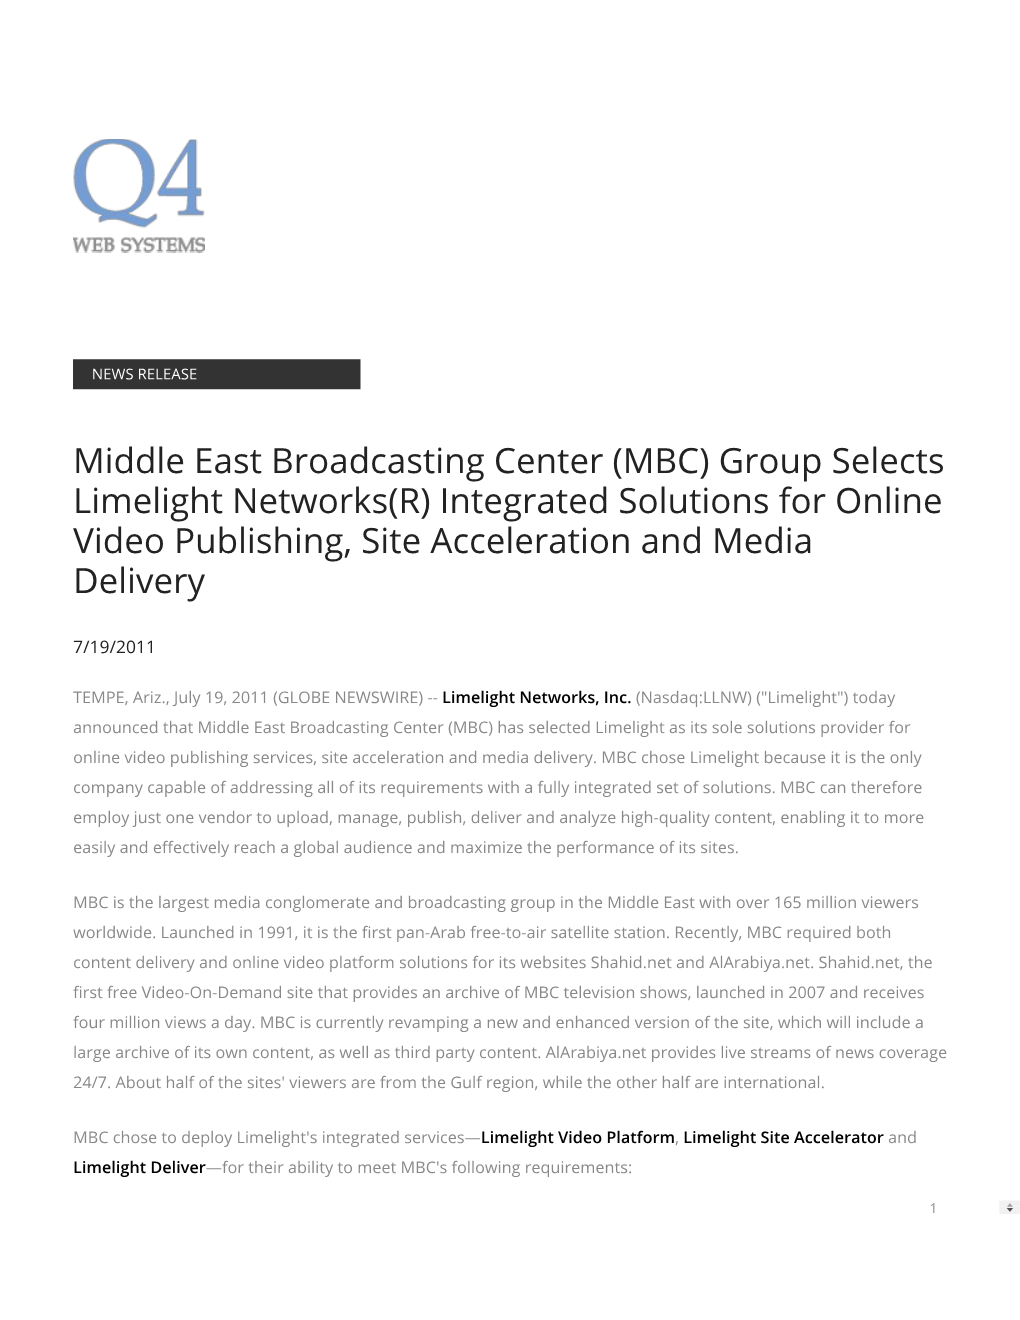 Middle East Broadcasting Center (MBC) Group Selects Limelight Networks(R) Integrated Solutions for Online Video Publishing, Site Acceleration and Media Delivery